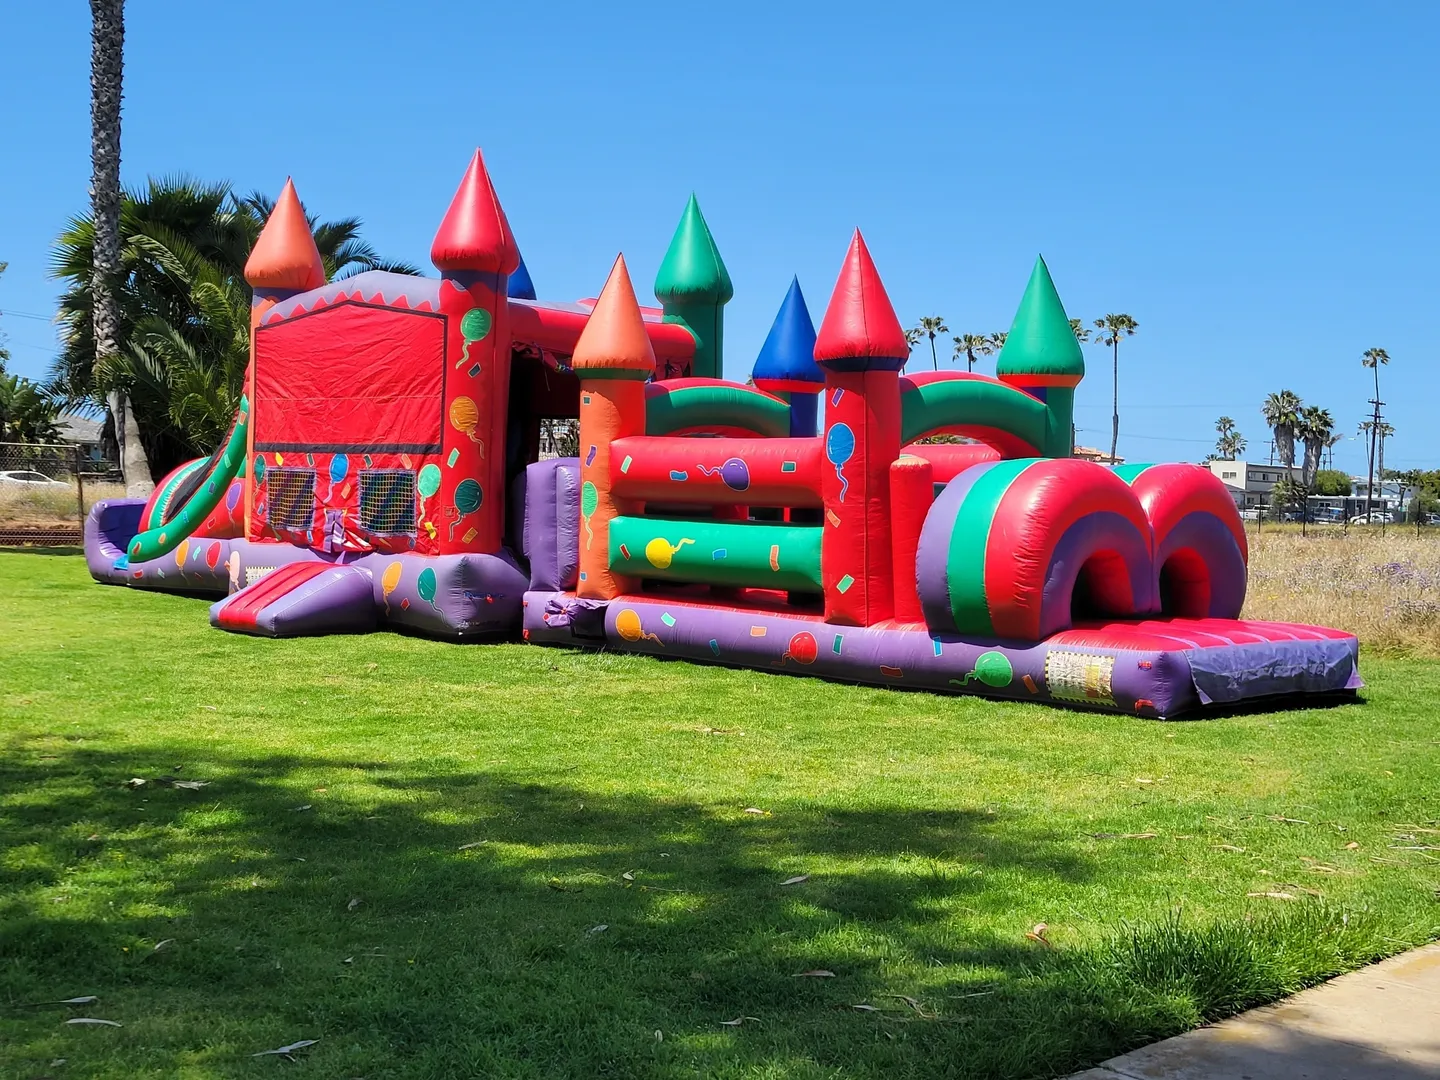 A large inflatable obstacle course in the middle of a park.